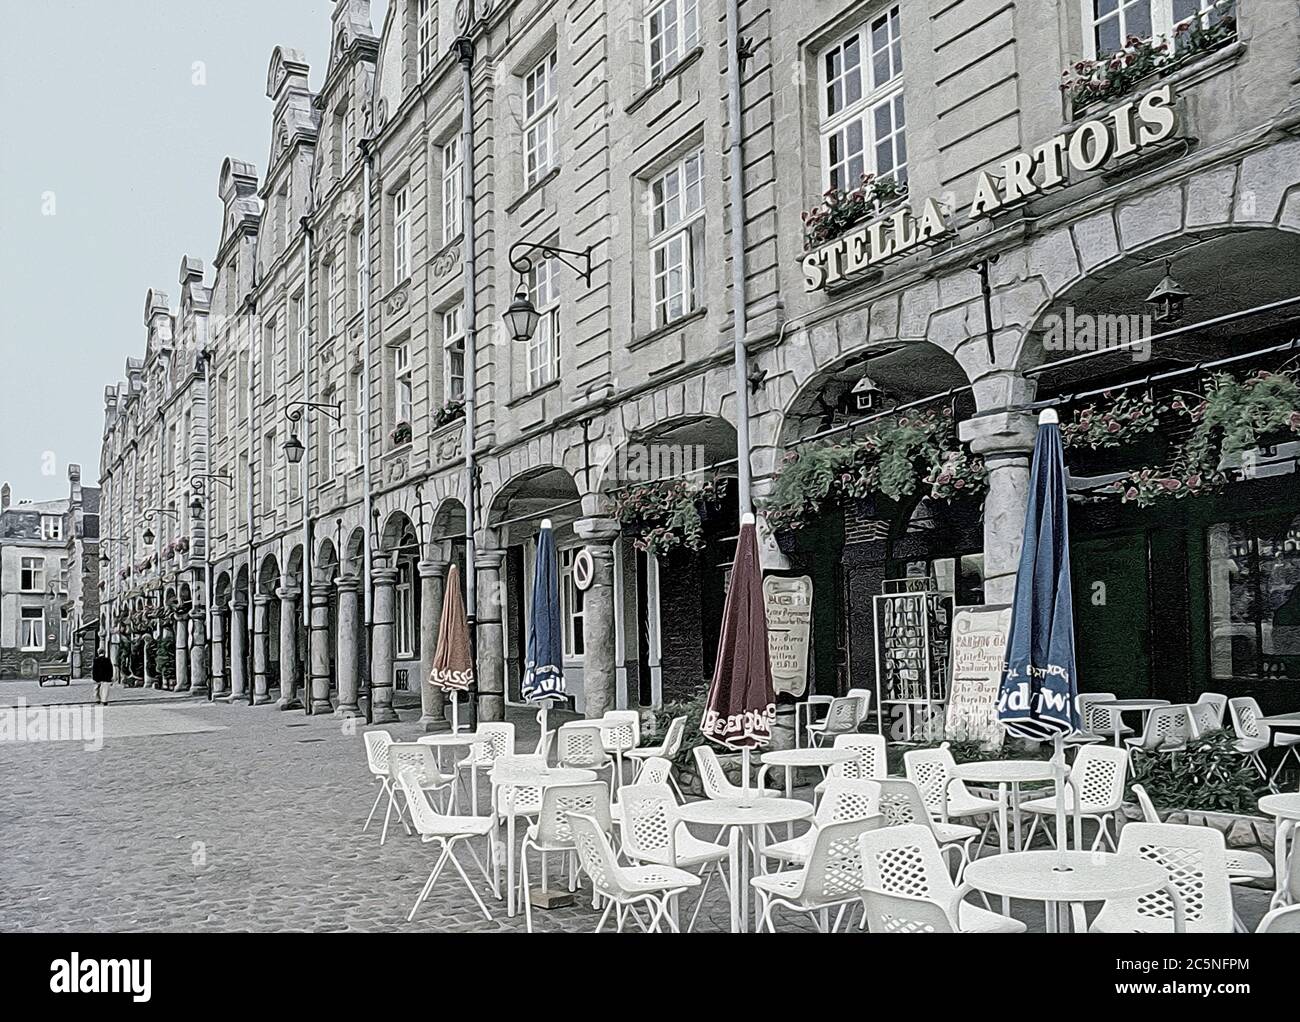 Archival scanned images of a bygone France. An illustrative look at Grande Place in Arras in France Stock Photo